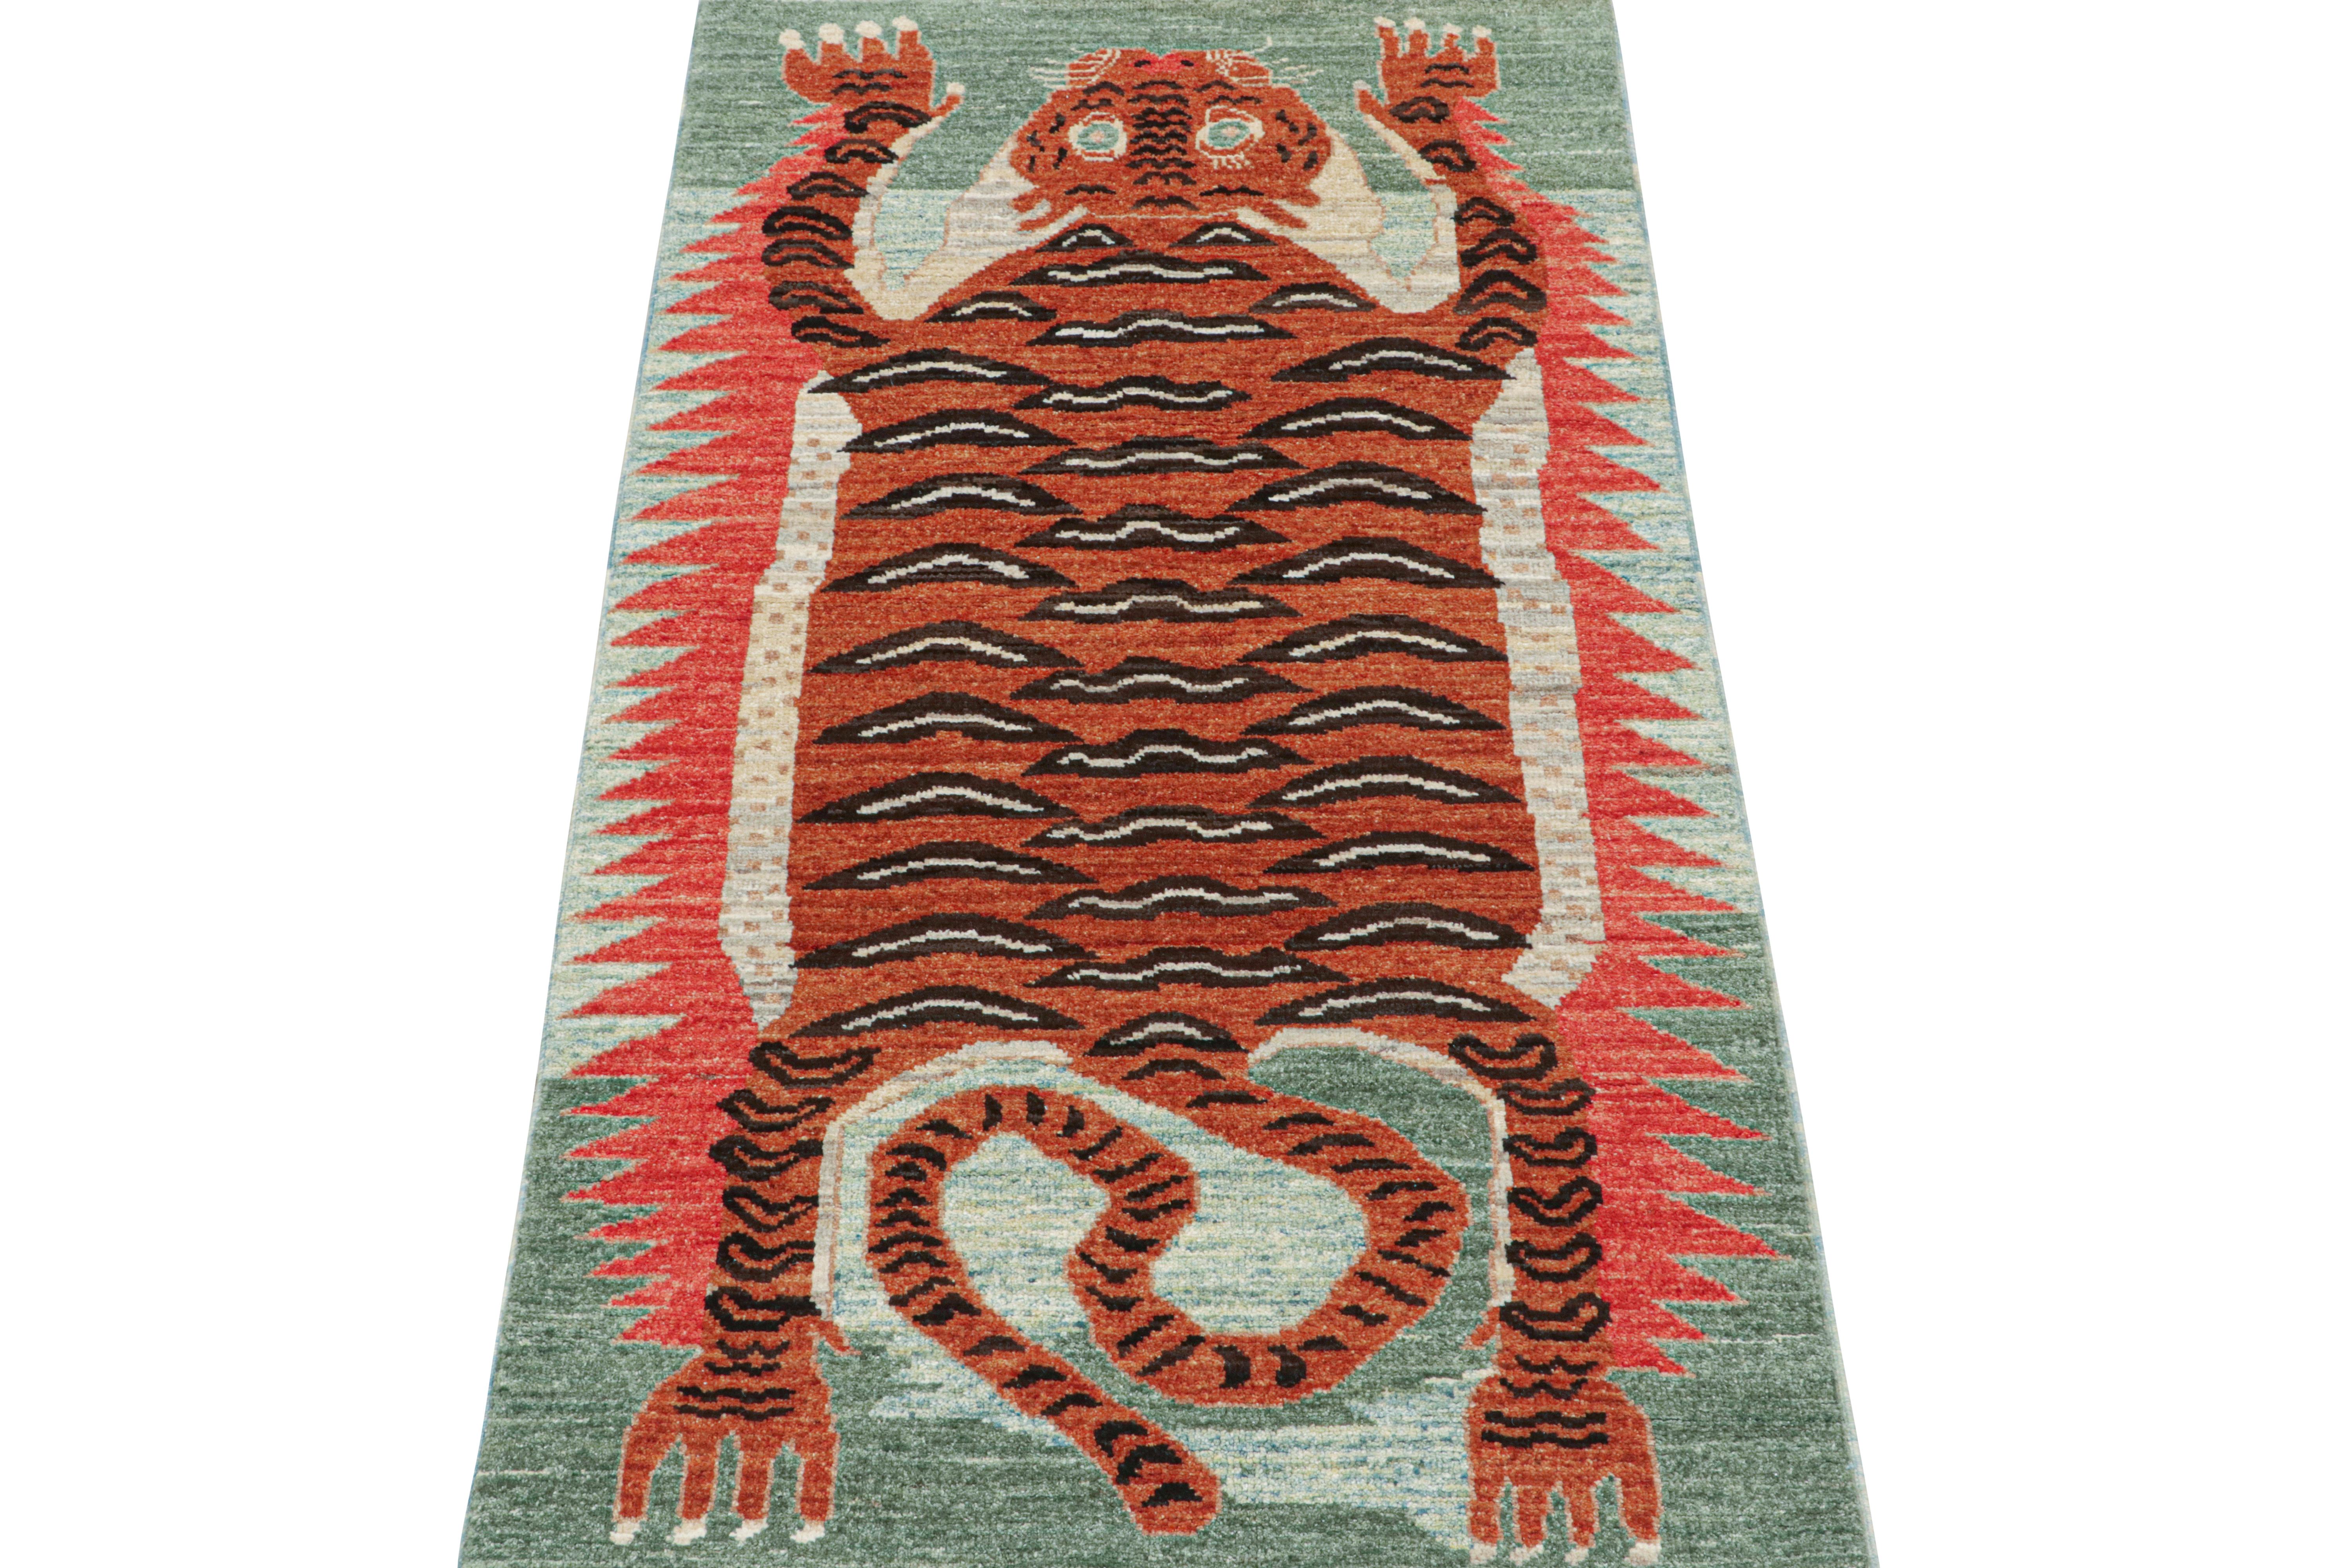 This contemporary 3x6 runner is a bold new addition to Rug & Kilim’s Tigers Collection. Our collection spans several cultures and recaptures iconic pictorial styles in folk art and handmade Oriental rugs alike. 

Further on the design:

This